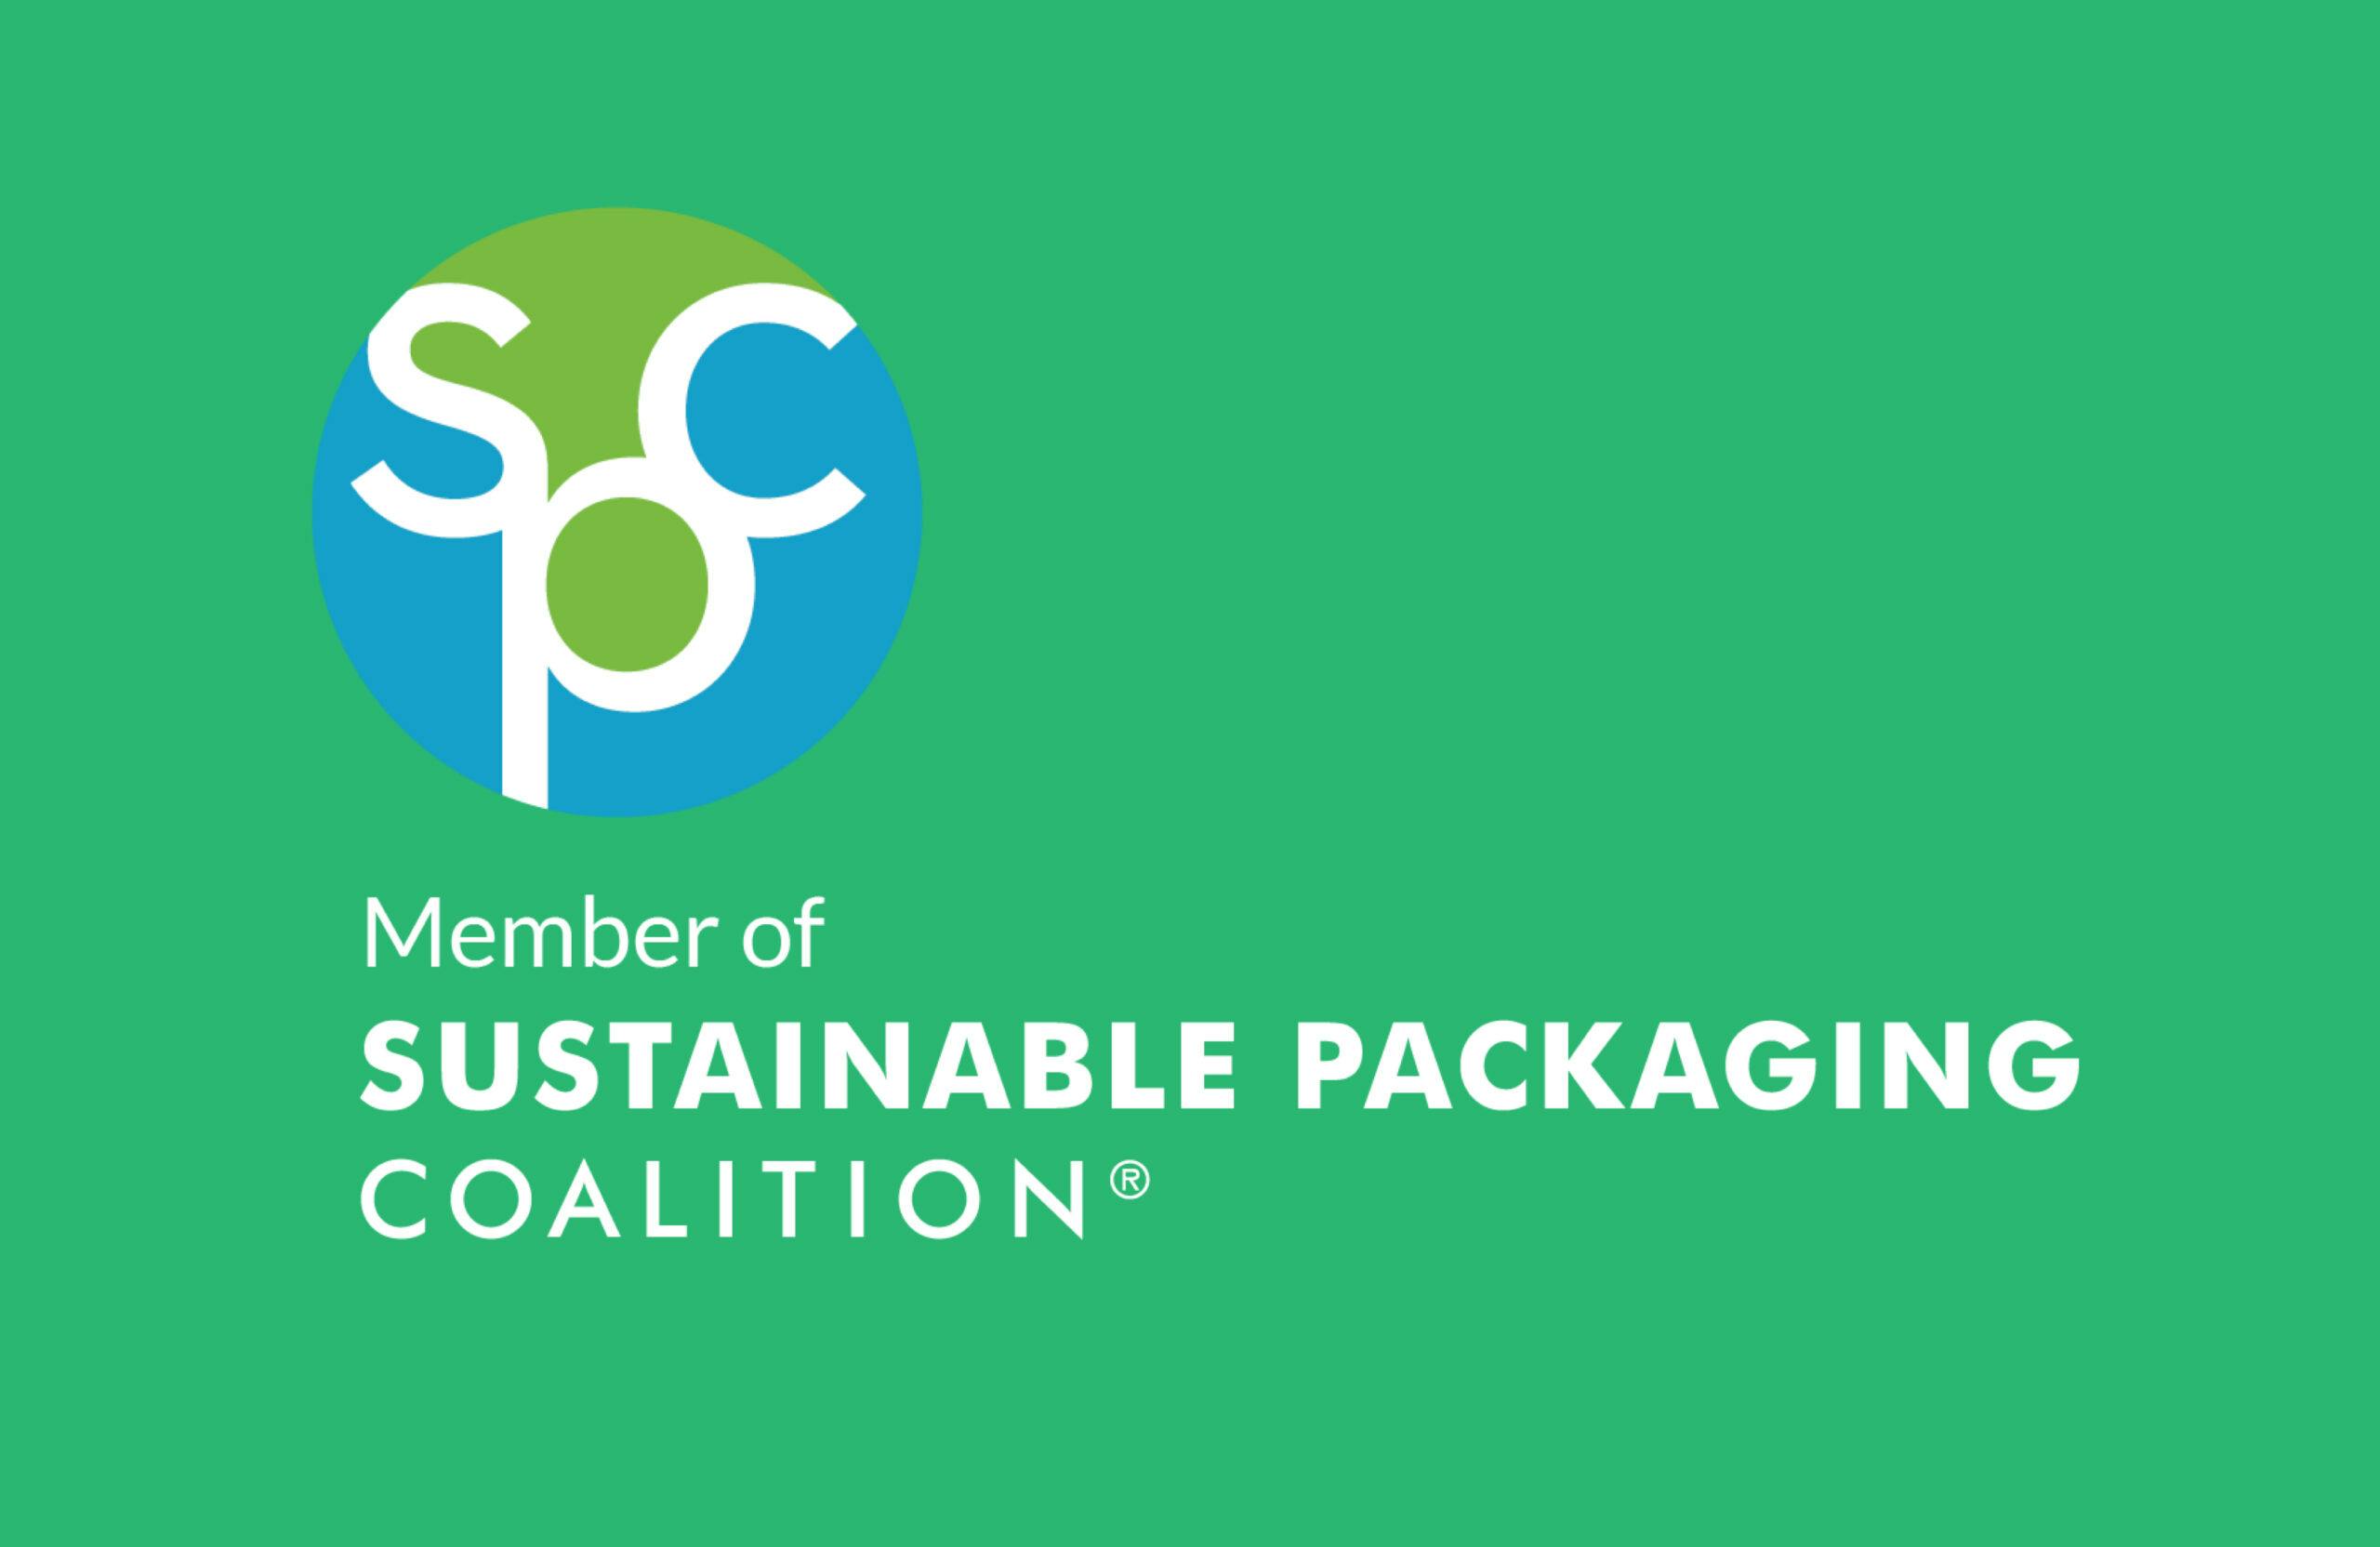 Image of Membro dell’Associazione per il Packaging Sostenibile  (SPC “ Sustainable Packaging  Coalition”)